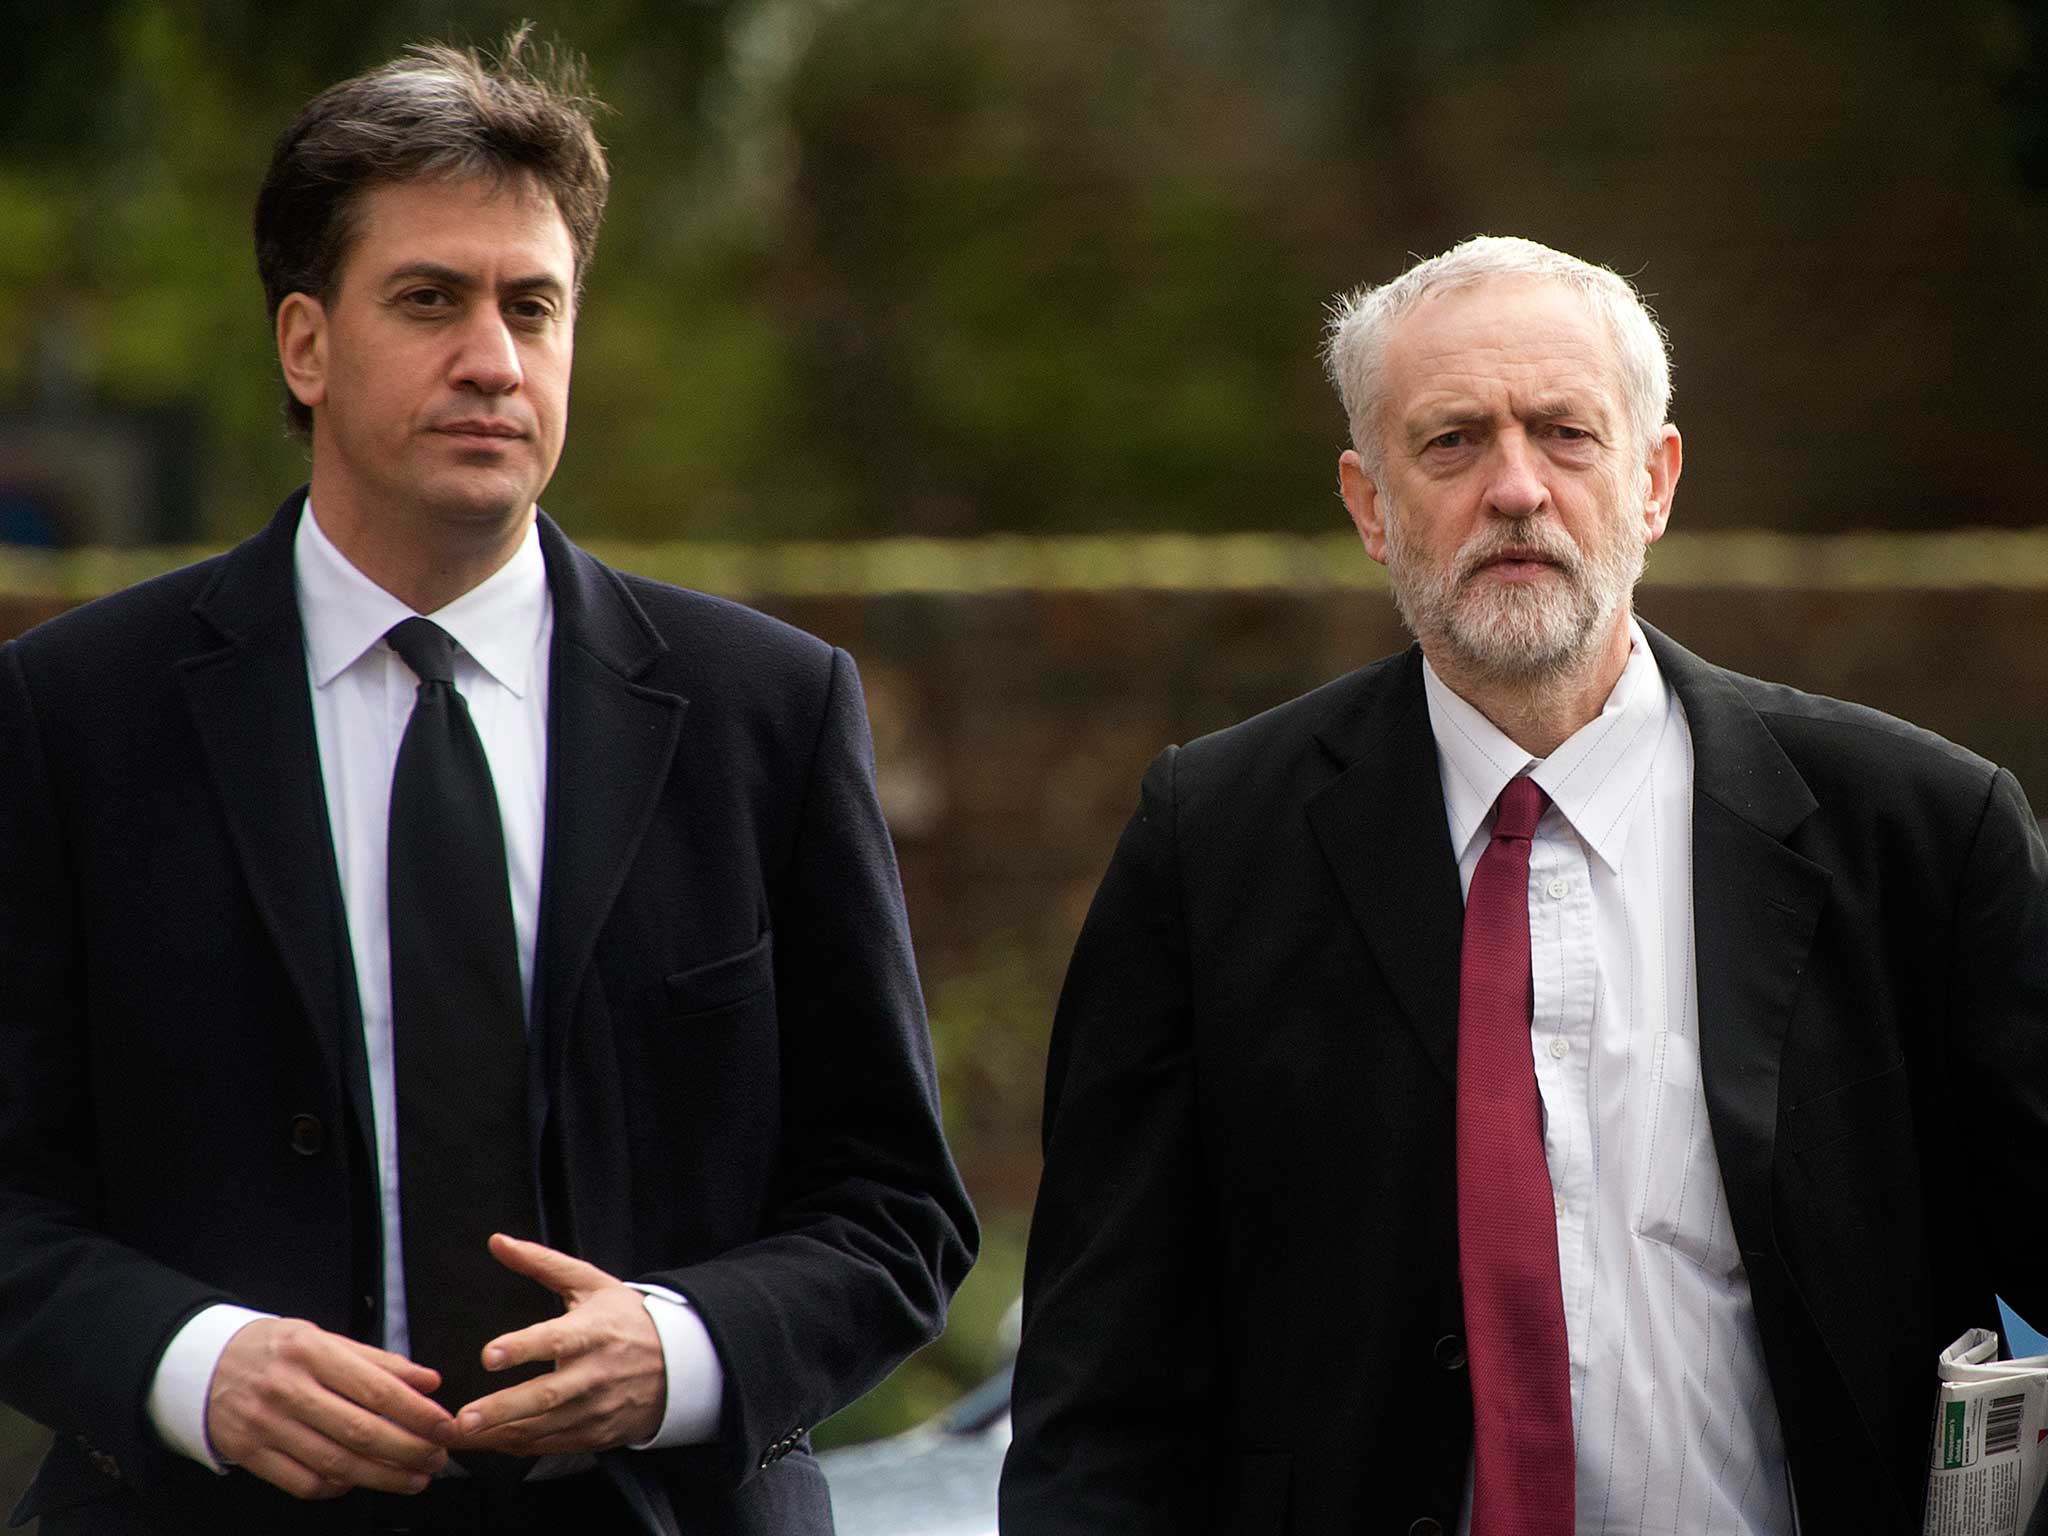 It comes amid reports that the Labour leader is attempting to persuade his predecessor to return to the Shadow Cabinet following the referendum